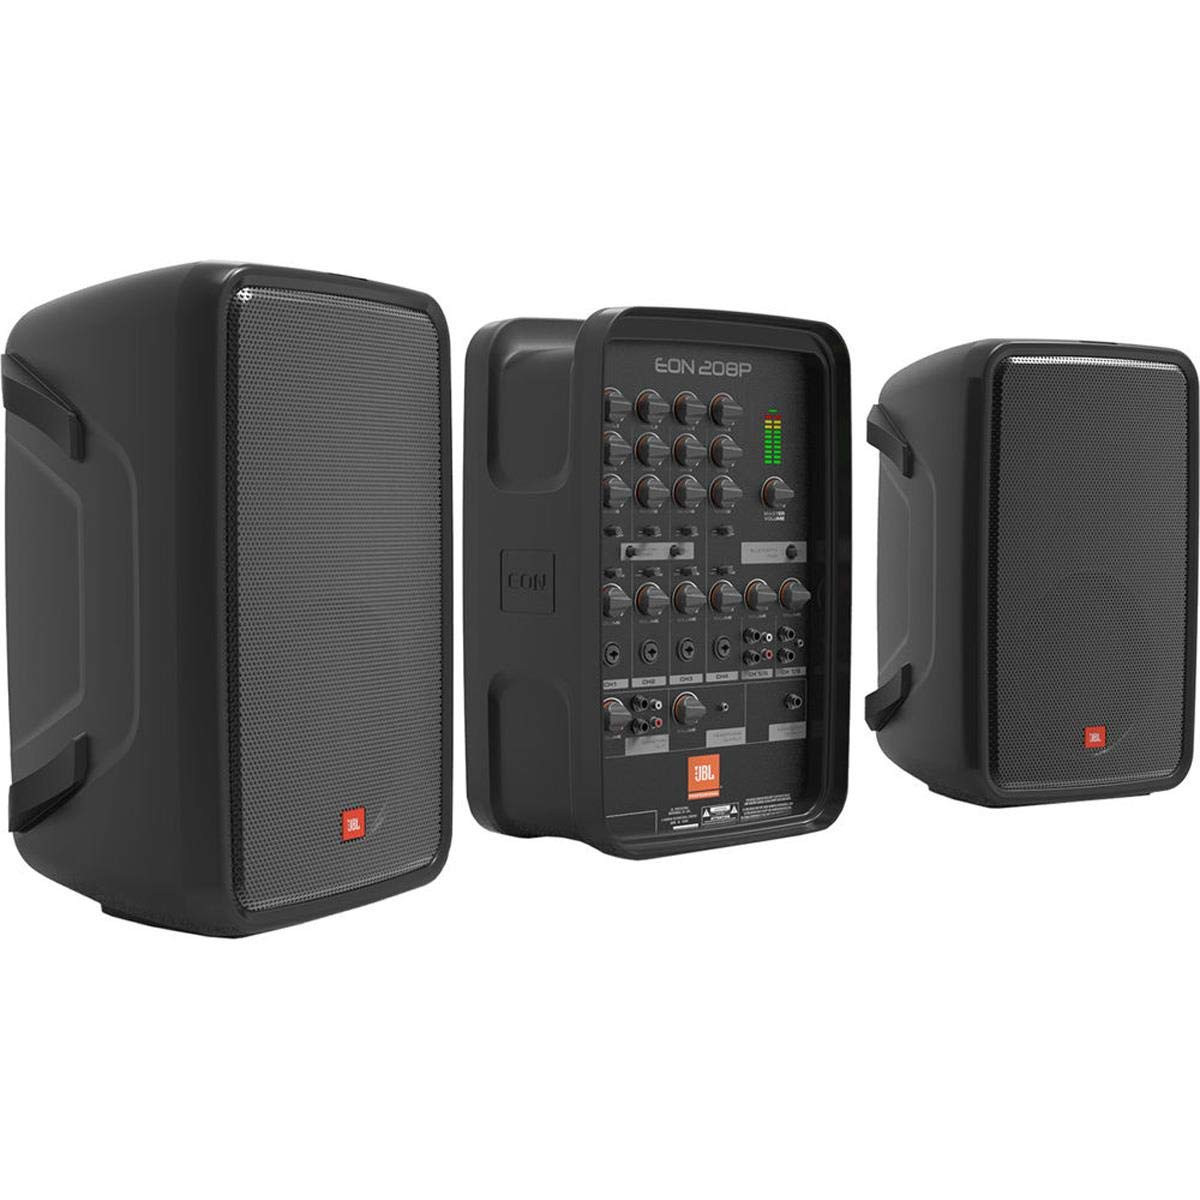 JBL Professional Auxiliary Subwoofer Jbl Eon208P 8-Inch 2-Way Portable Pa System Speaker Black